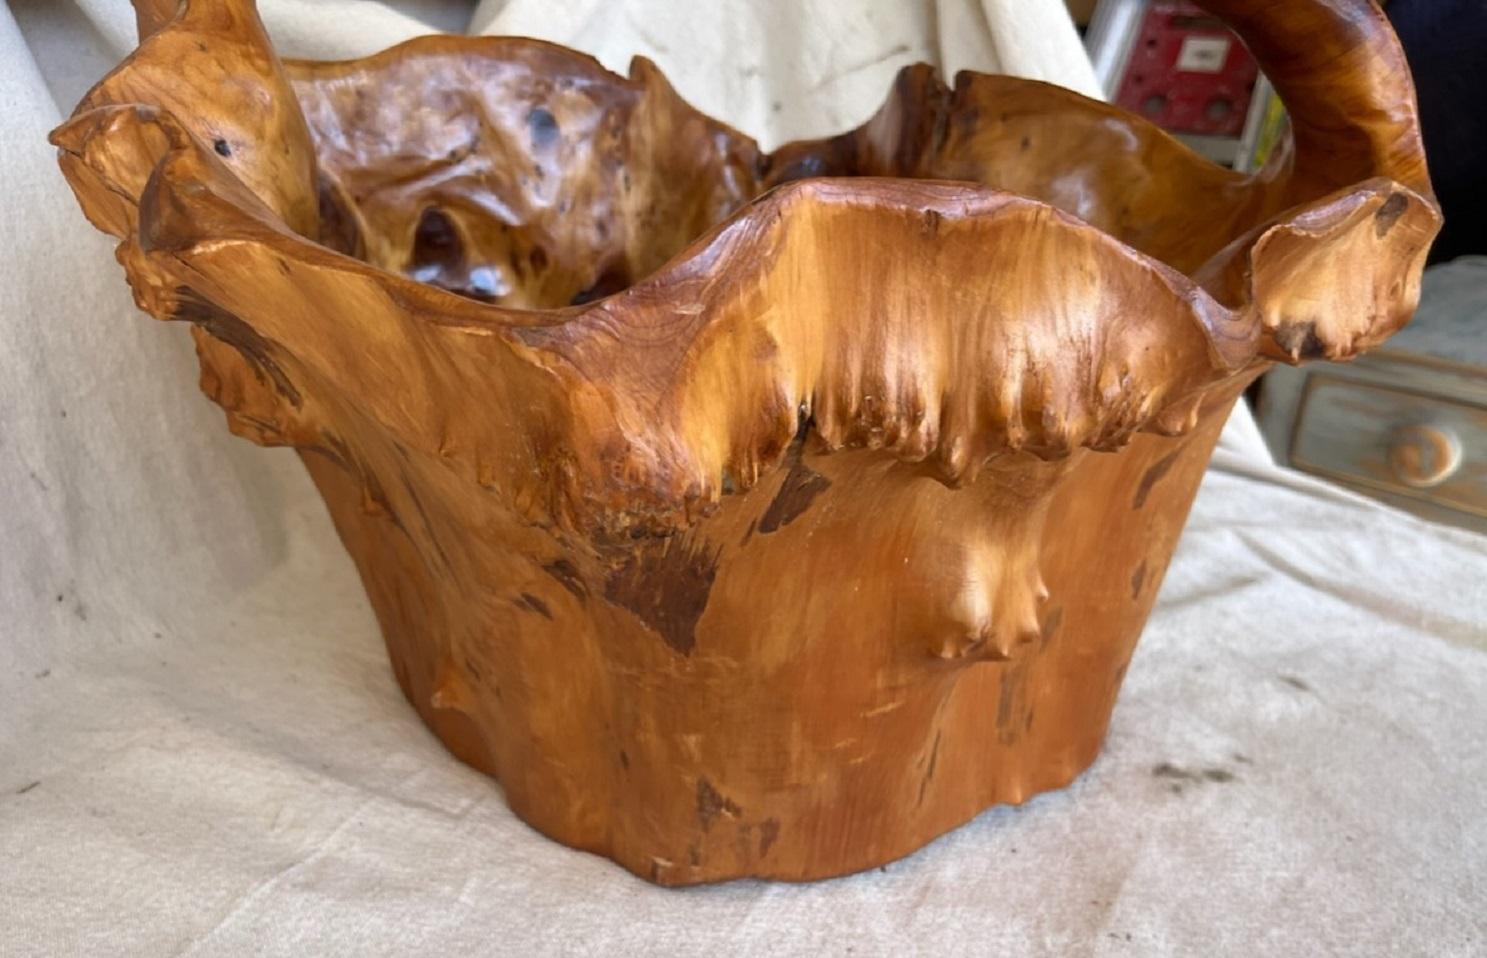 This large root or burl wood basket has an amazing patina and surface. The condition is very good and sturdy.